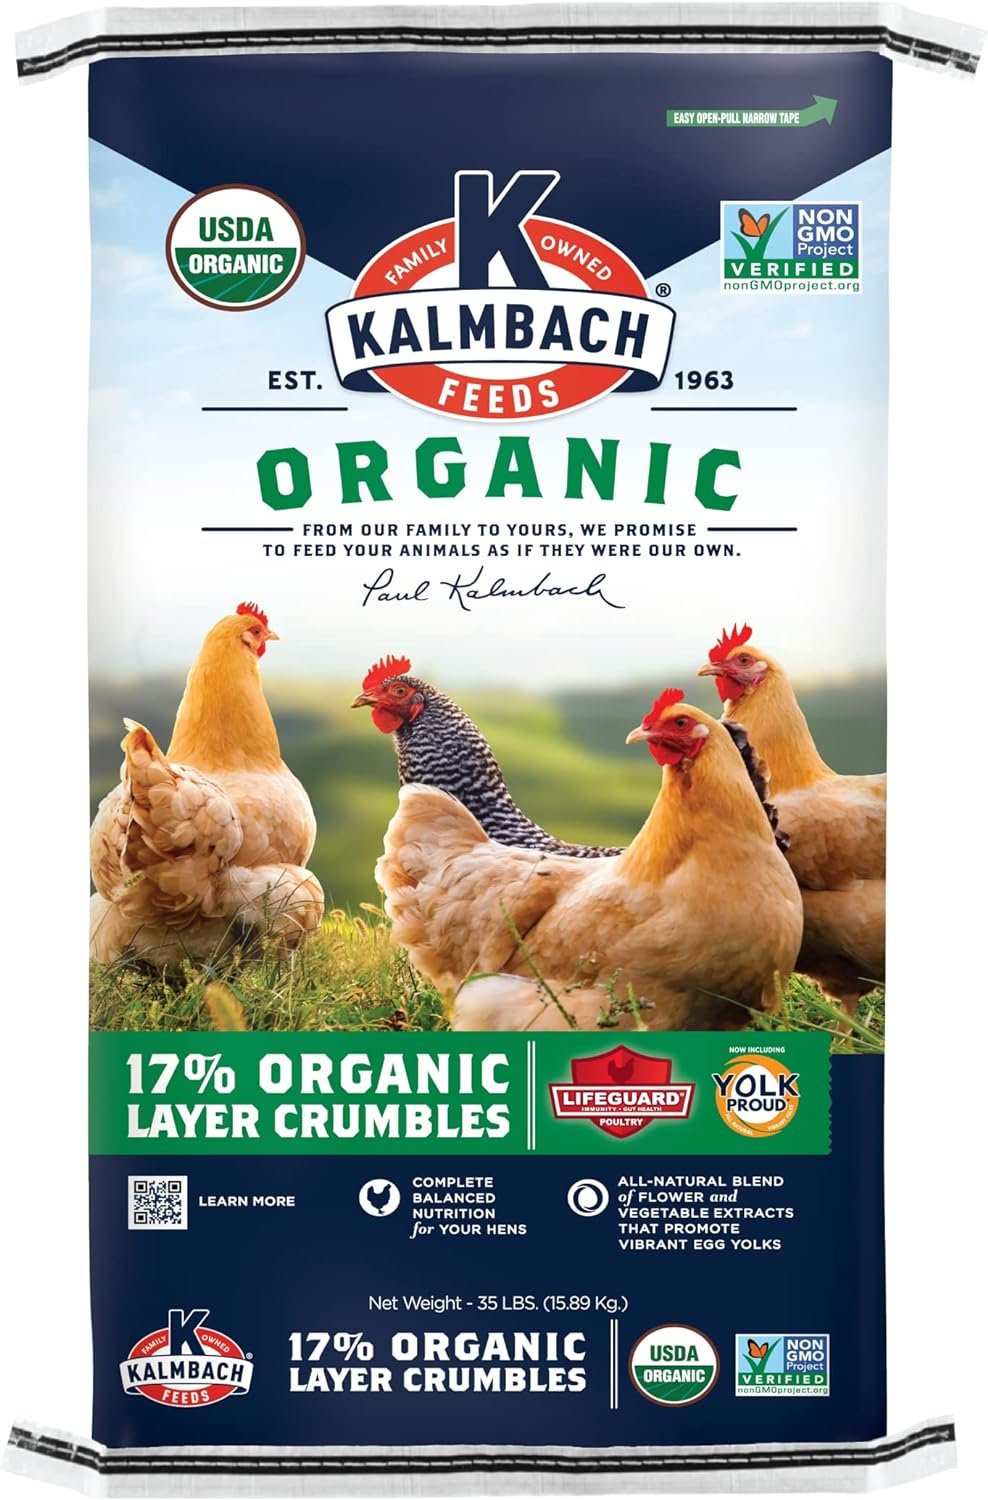 Kalmbach Feeds 17% Organic Crumbles Feed for Layer Chickens, 35 lb Bag